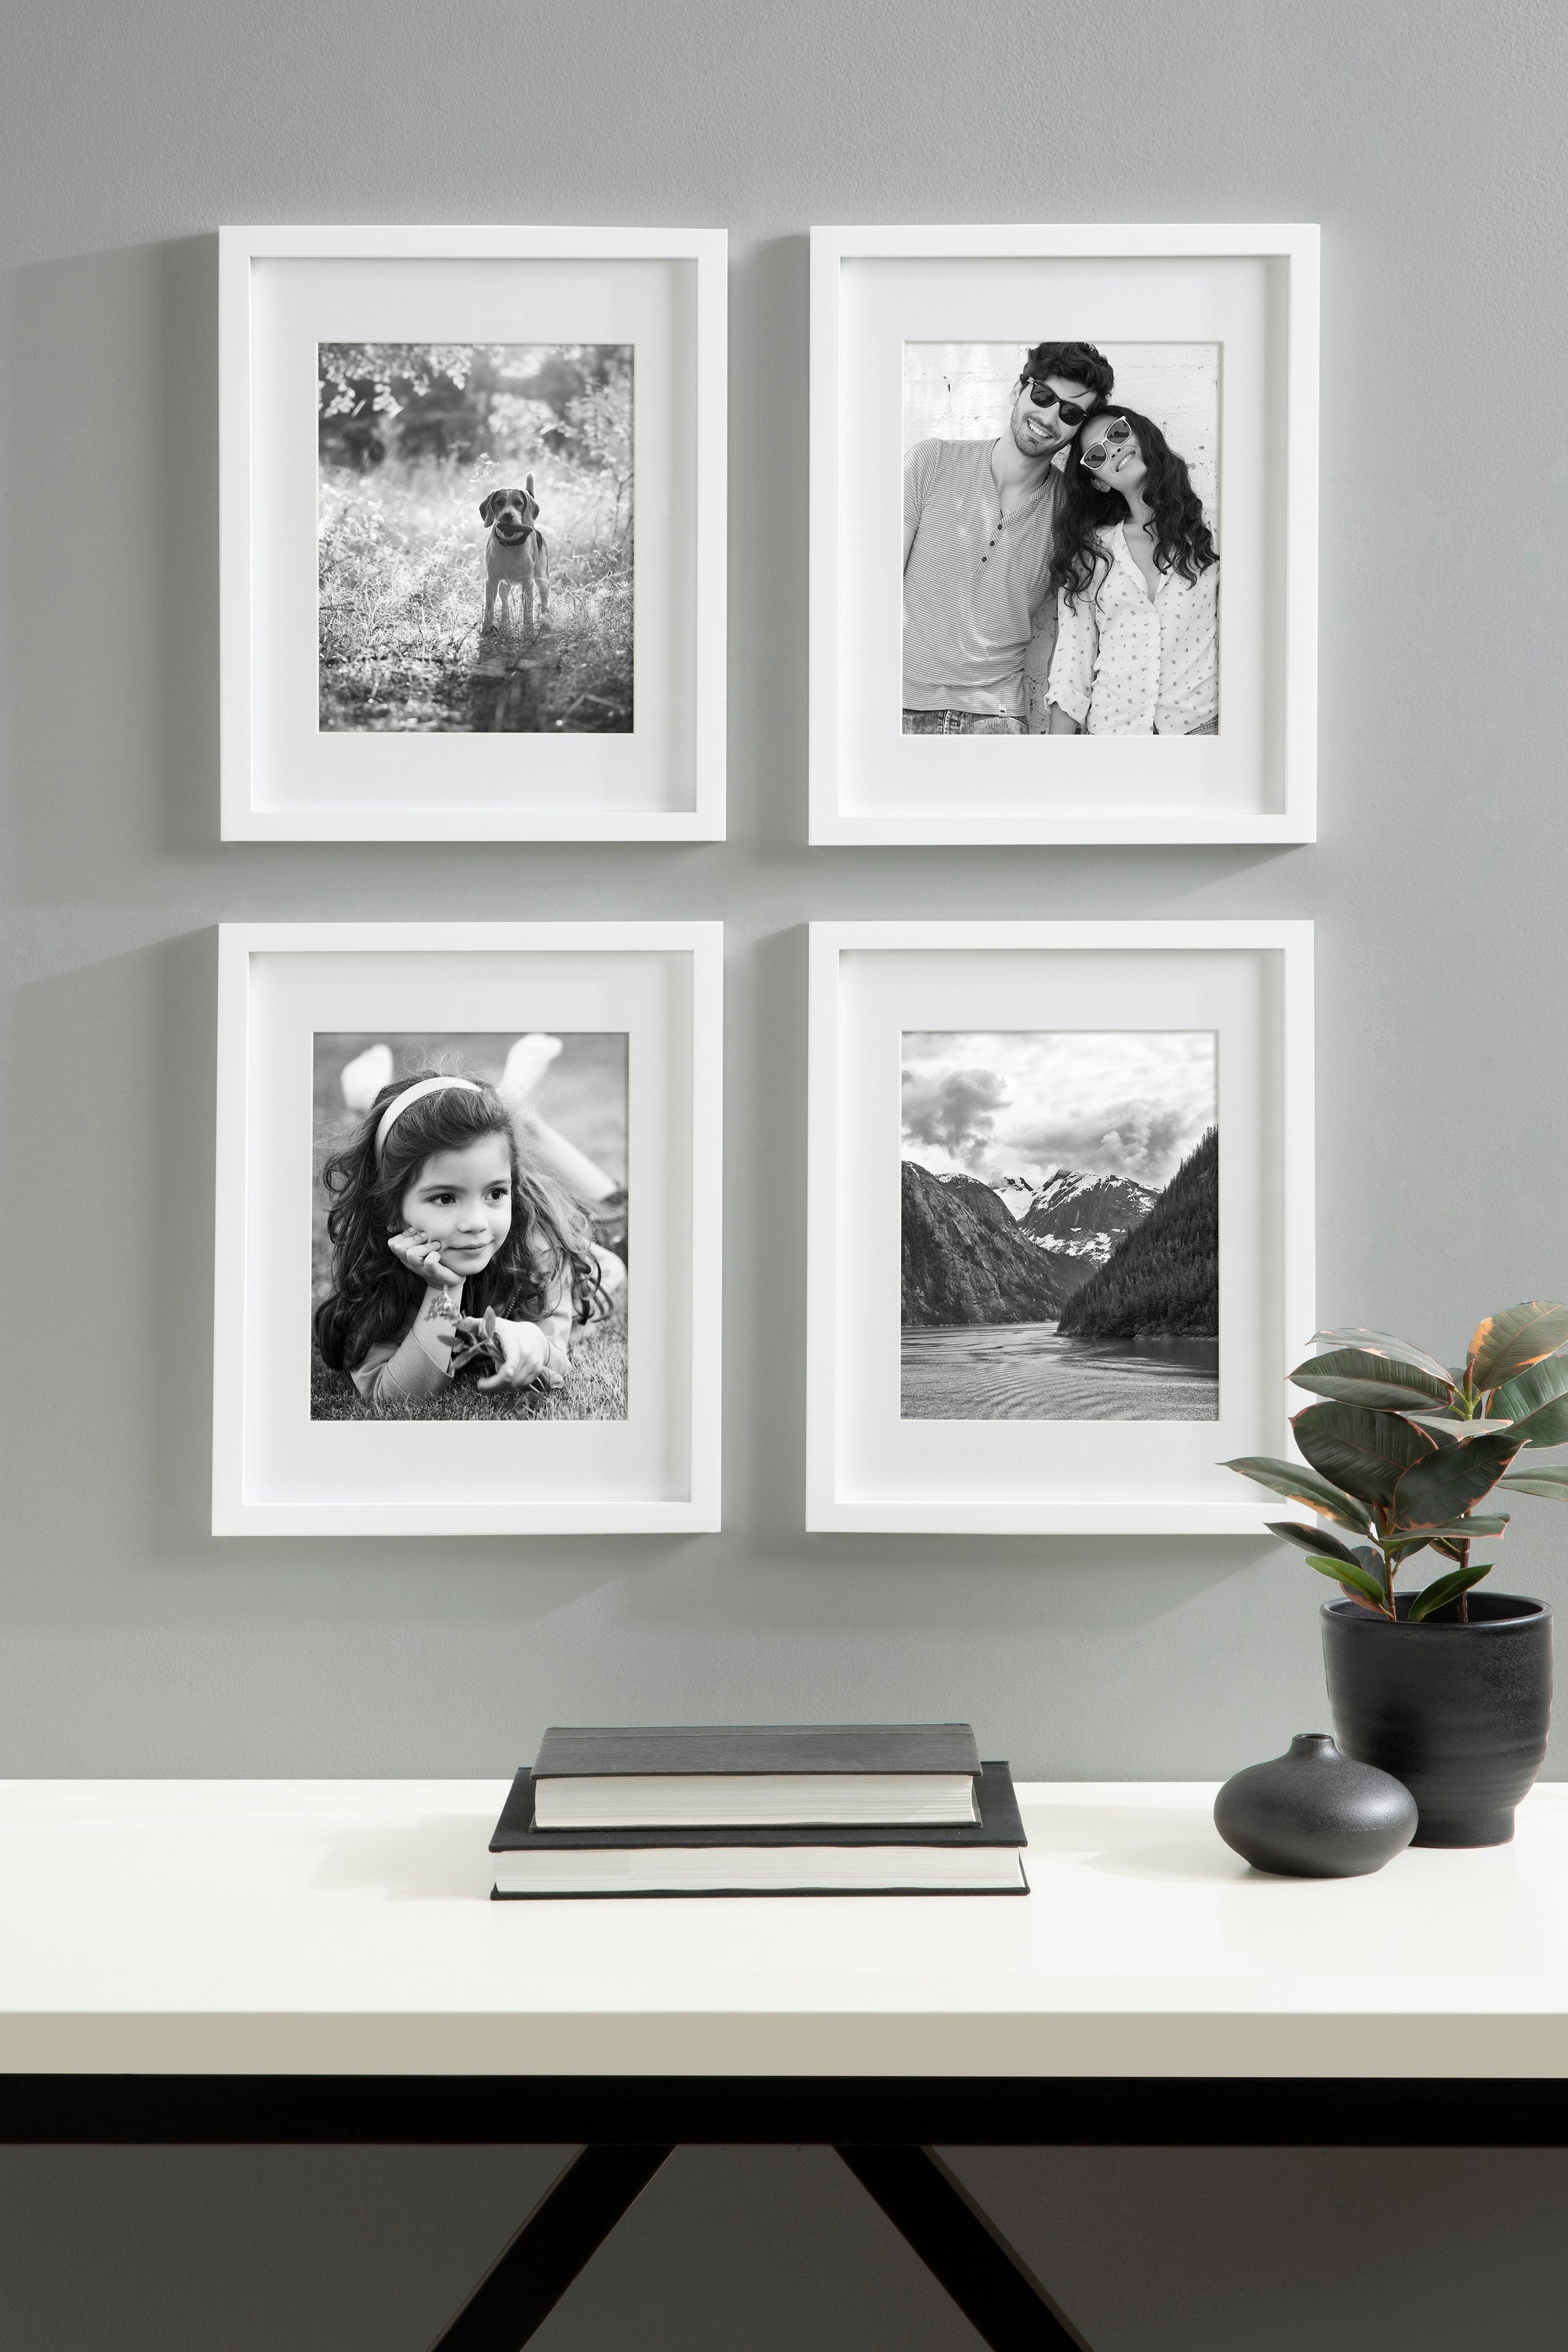 StyleWell 11 x 14 Matted to 8 x 10 Ash Gallery Wall Picture Frames (Set of 4), Grey